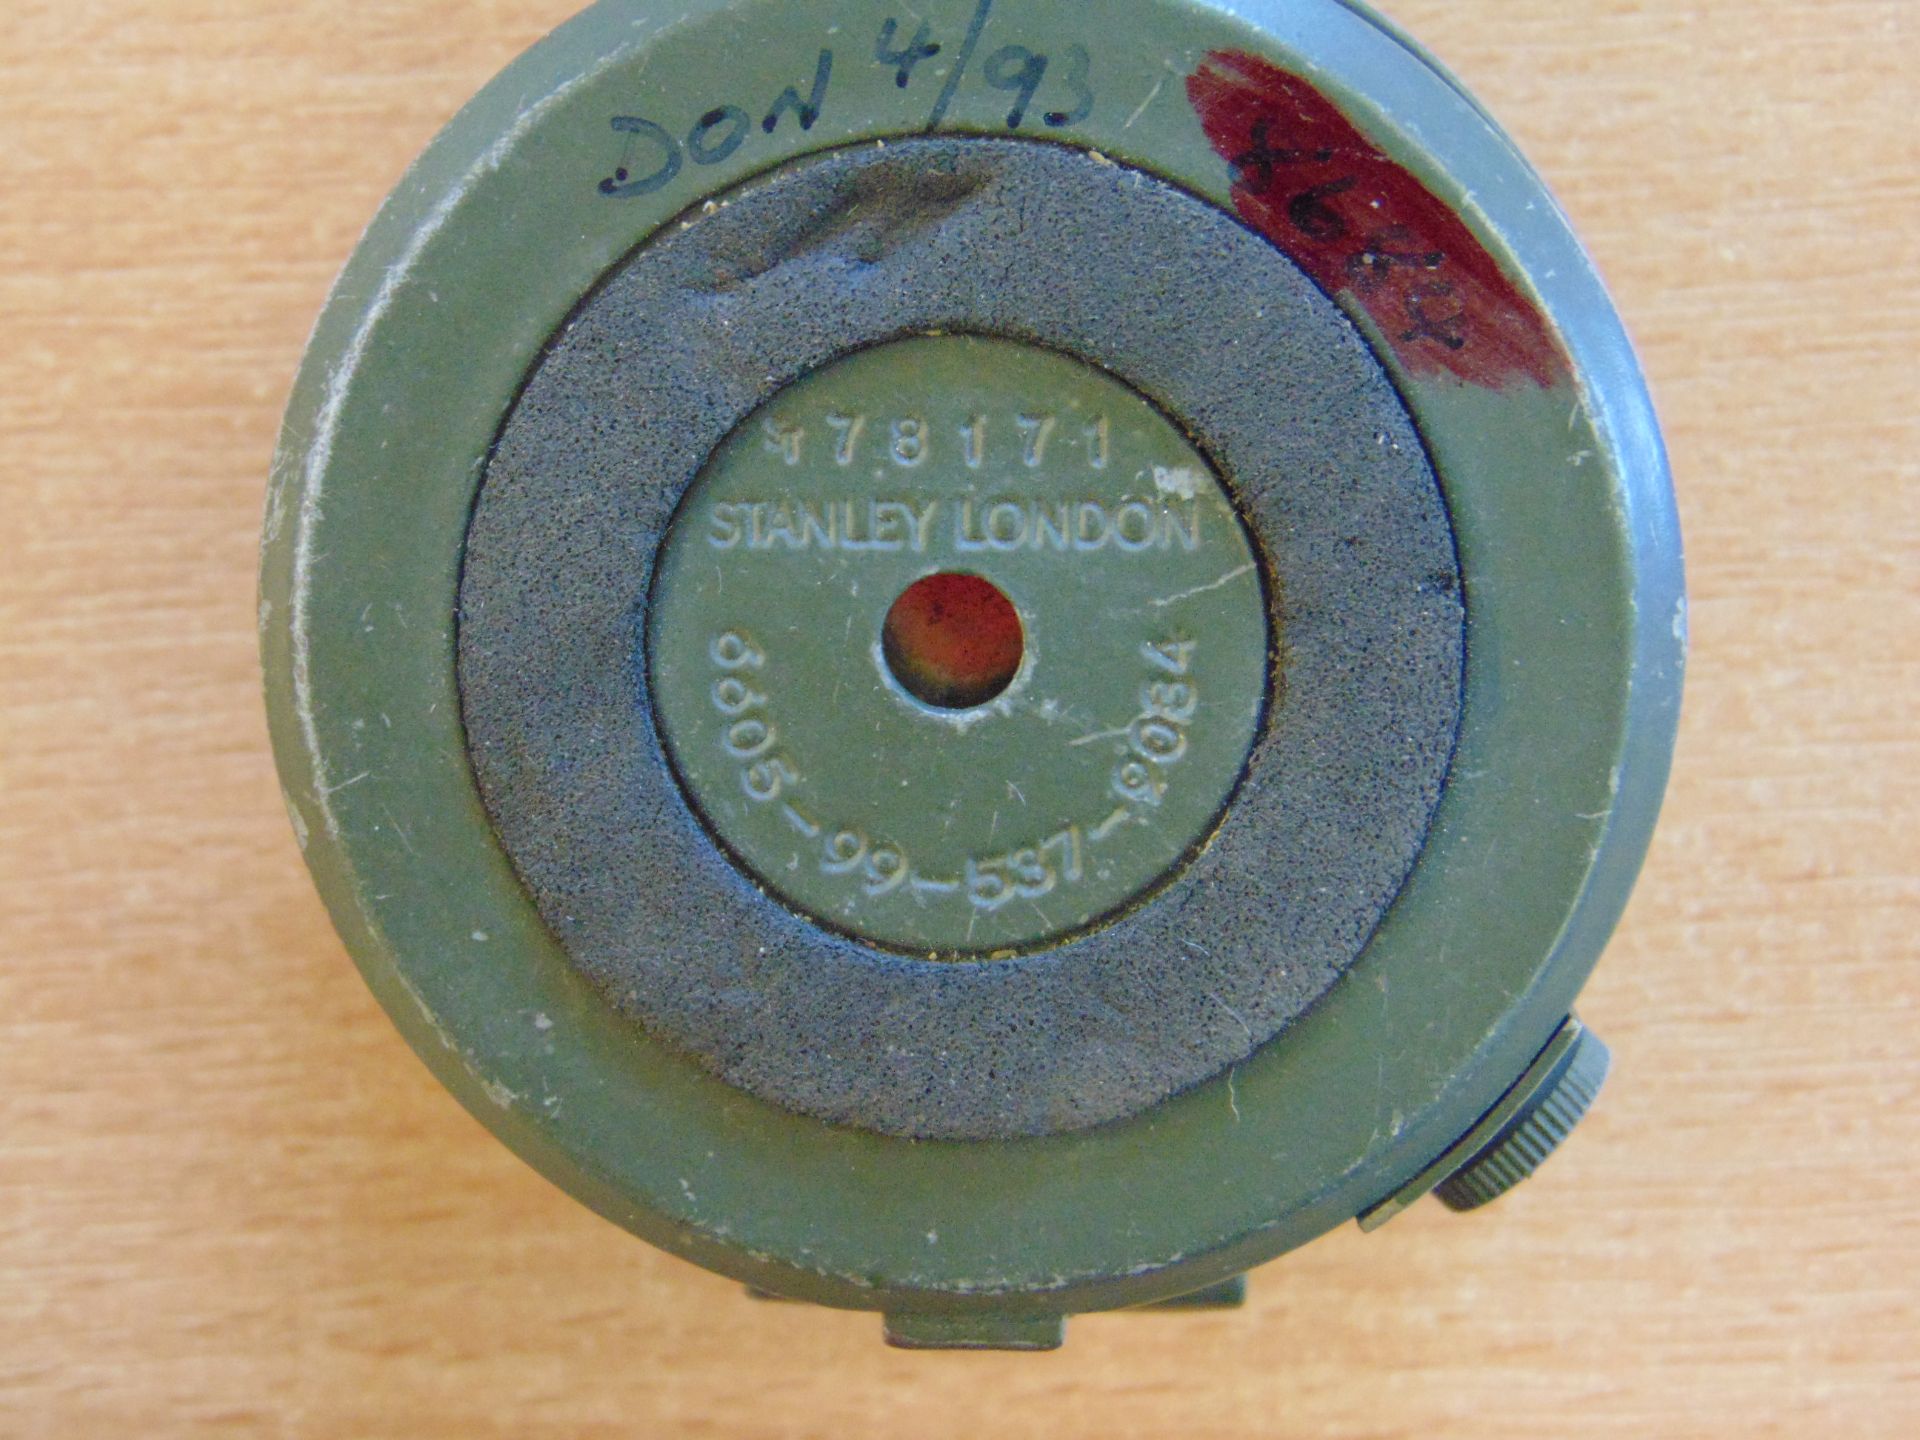 STANLEY LONDON BRASS PRISMATIC COMPASS BRITISH ARMY ISSUE IN MILS - Image 5 of 5